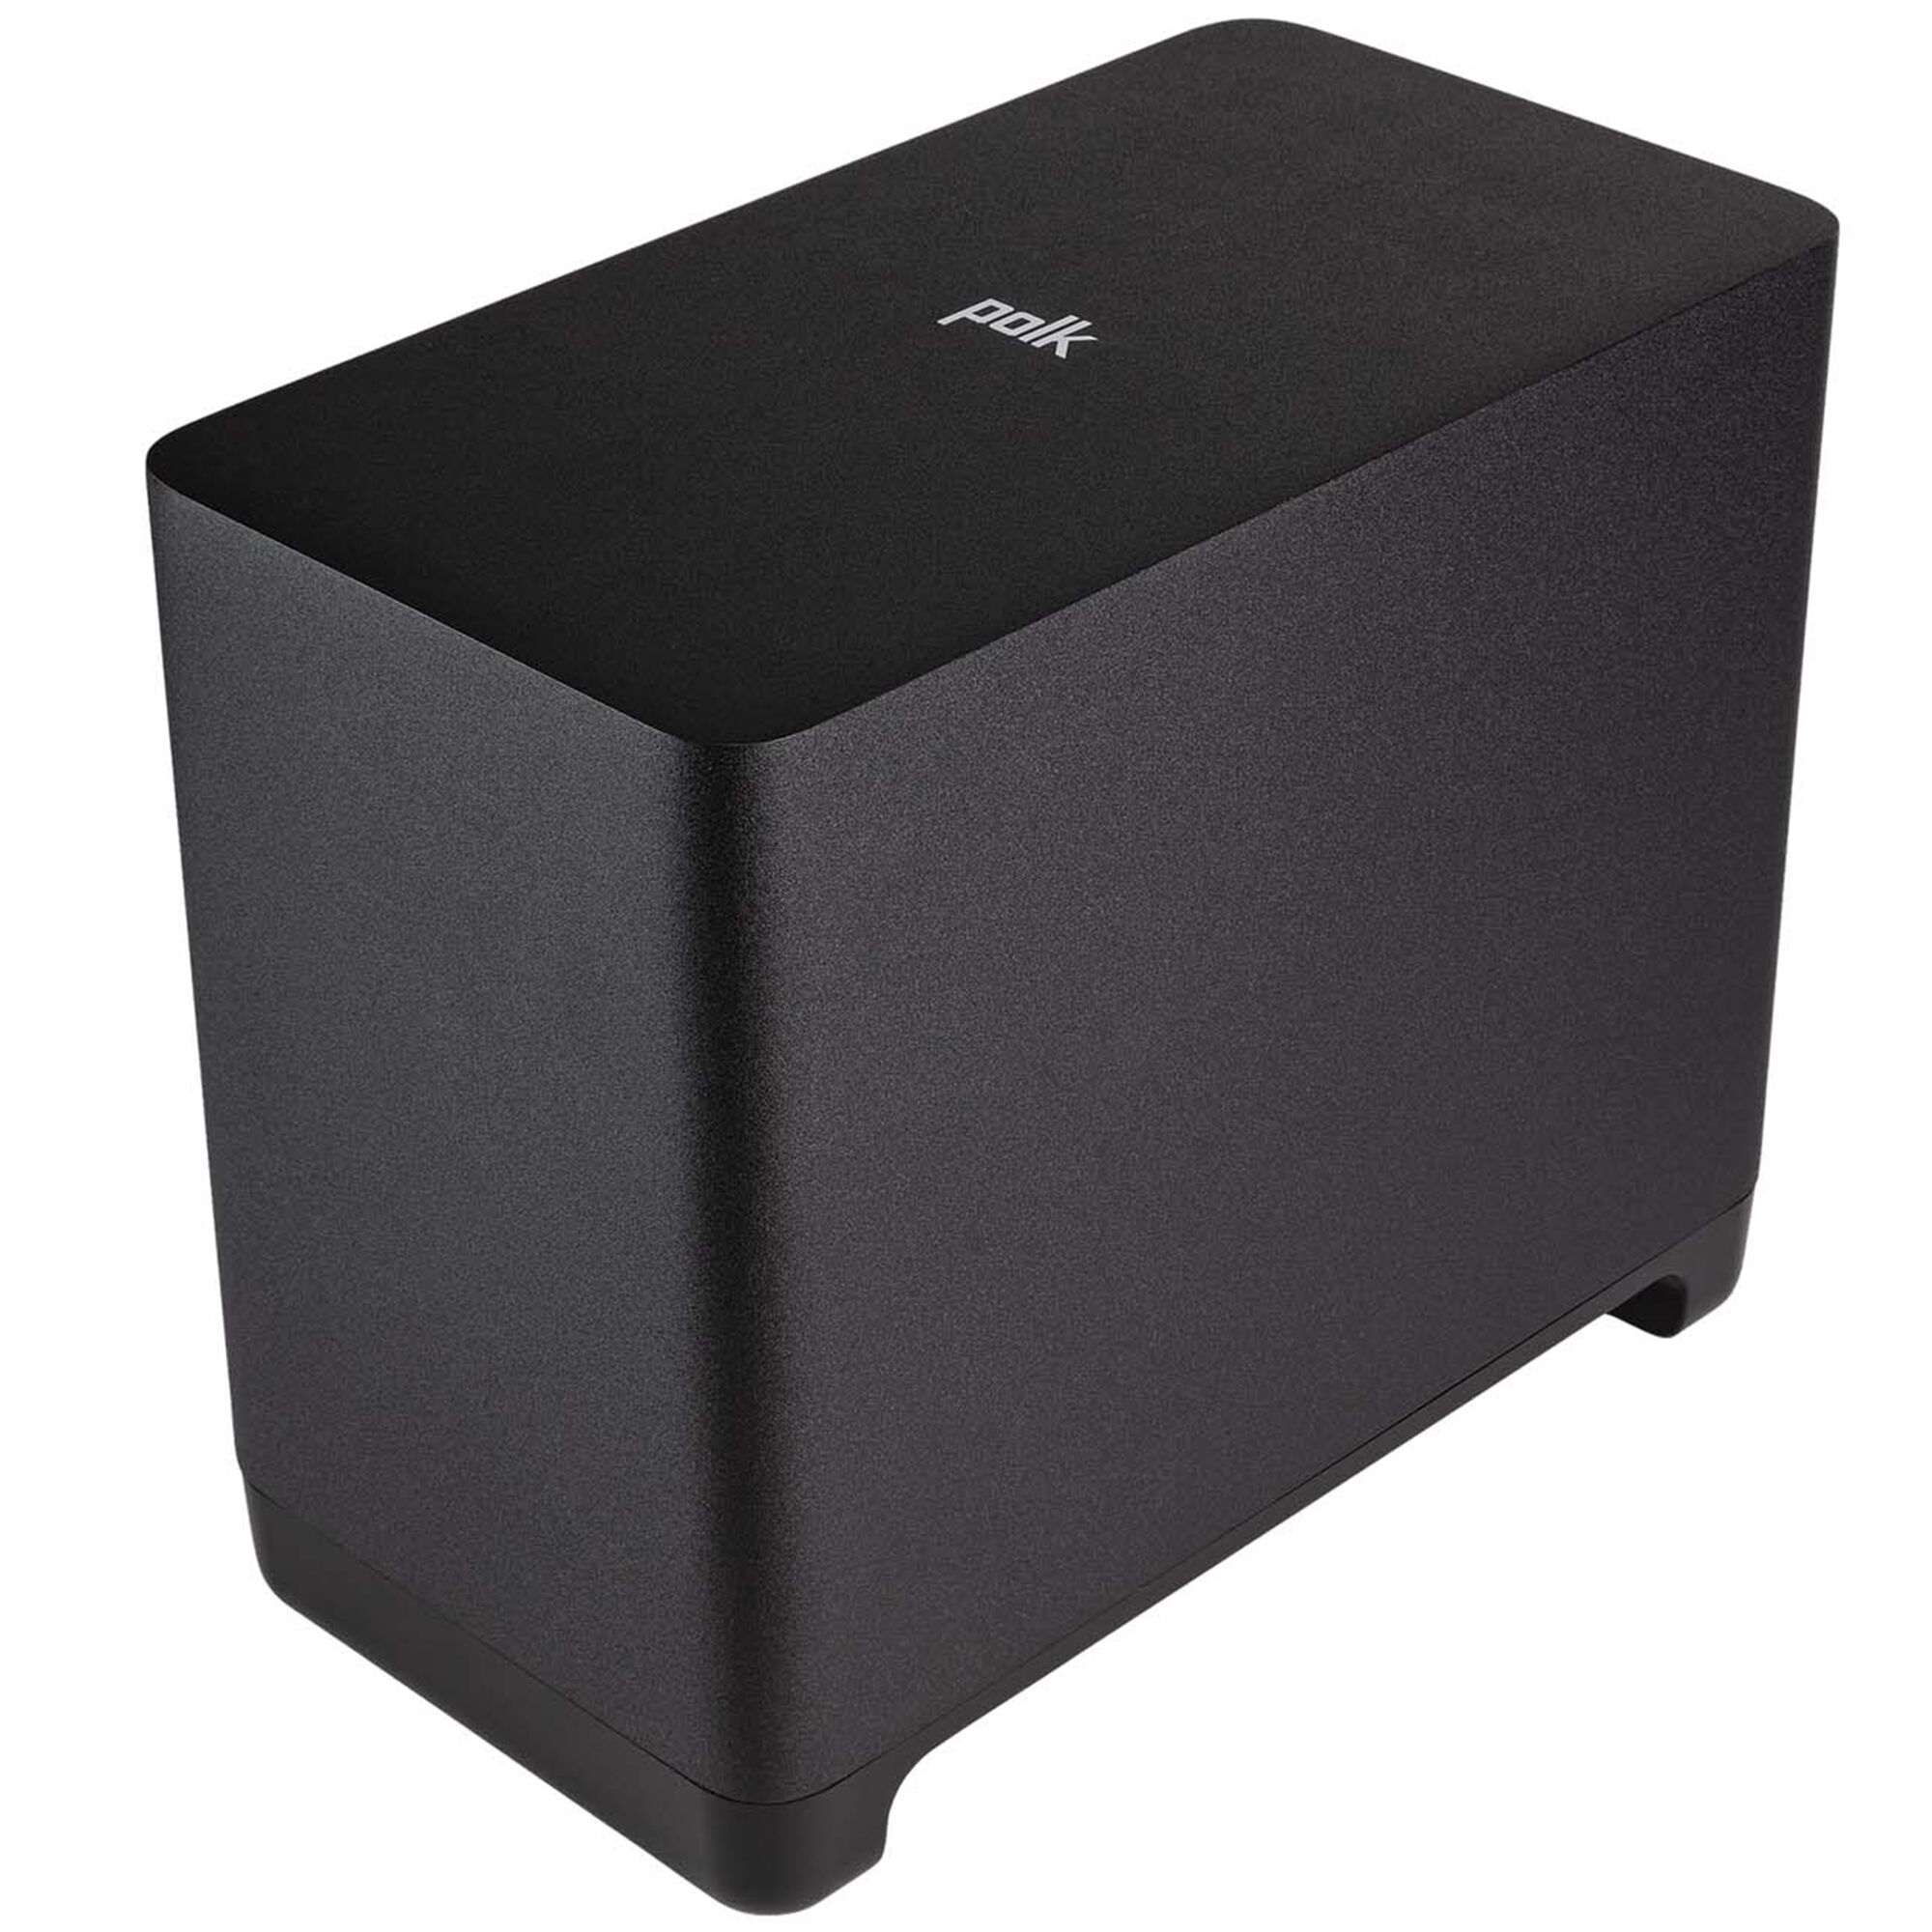 Polk React Sub Powerful Wireless Subwoofer for The React Sound Bar - Black